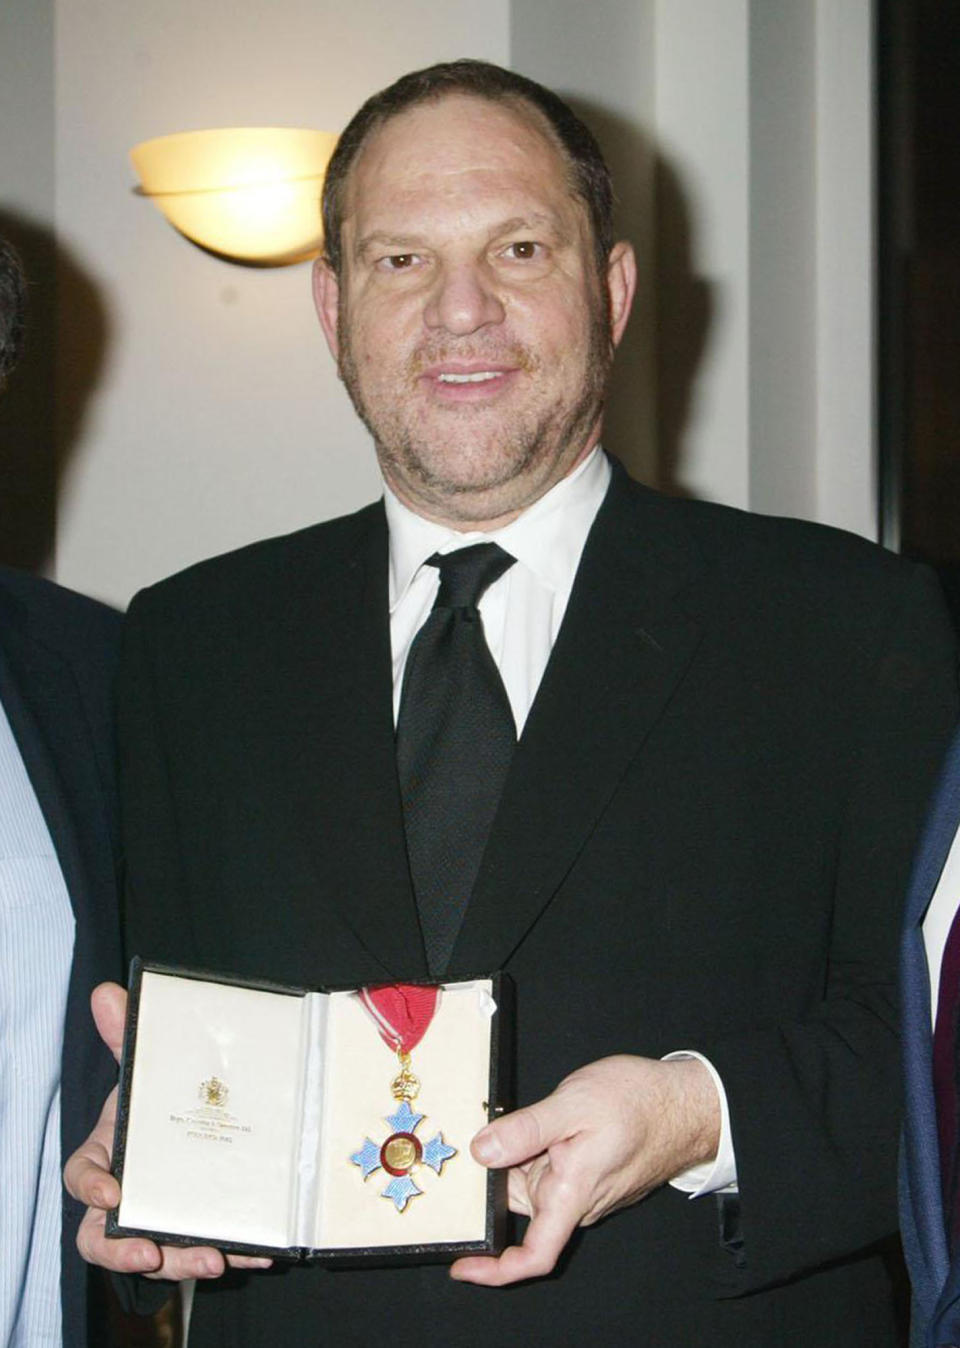 TIME OF DISTRIBUTION: IMMEDIATE NOVEMBER 24 PRNewswire, London, 24/11/2004: Harvey Weinstein received a CBE, Commander of the British Empire, at an investiture ceremony at the Residence of the British Consul General on Monday, November 22, 2004 in New York City.  Photo includes (from left to right) Miramax co-chairmen Bob Weinstein and Harvey Weinstein and the British Consul General Sir Philip Thomas, Courtesy of DMIPhoto.  Media contact: Matthew.hiltzik@miramax.com, tel +1-212-941-3883, Sarah.levinson@miramax.com, tel +1-212-941-3875.  Visit www.mediapoint.press.net or www.prnewswire.co.uk. Media Contact:  Matthew.hiltzik@miramax.com , tel +1-212-941-3883, Sarah.levinson@miramax.com,  tel +1-212-941-3875 (PRNewsFoto) ... PRN_FILM_Miramax_Weinstein ... 24-11-2004 ... LONDON ... GBR ... Photo credit should read: Press Association Images. Unique Reference No. 2139769 ... 